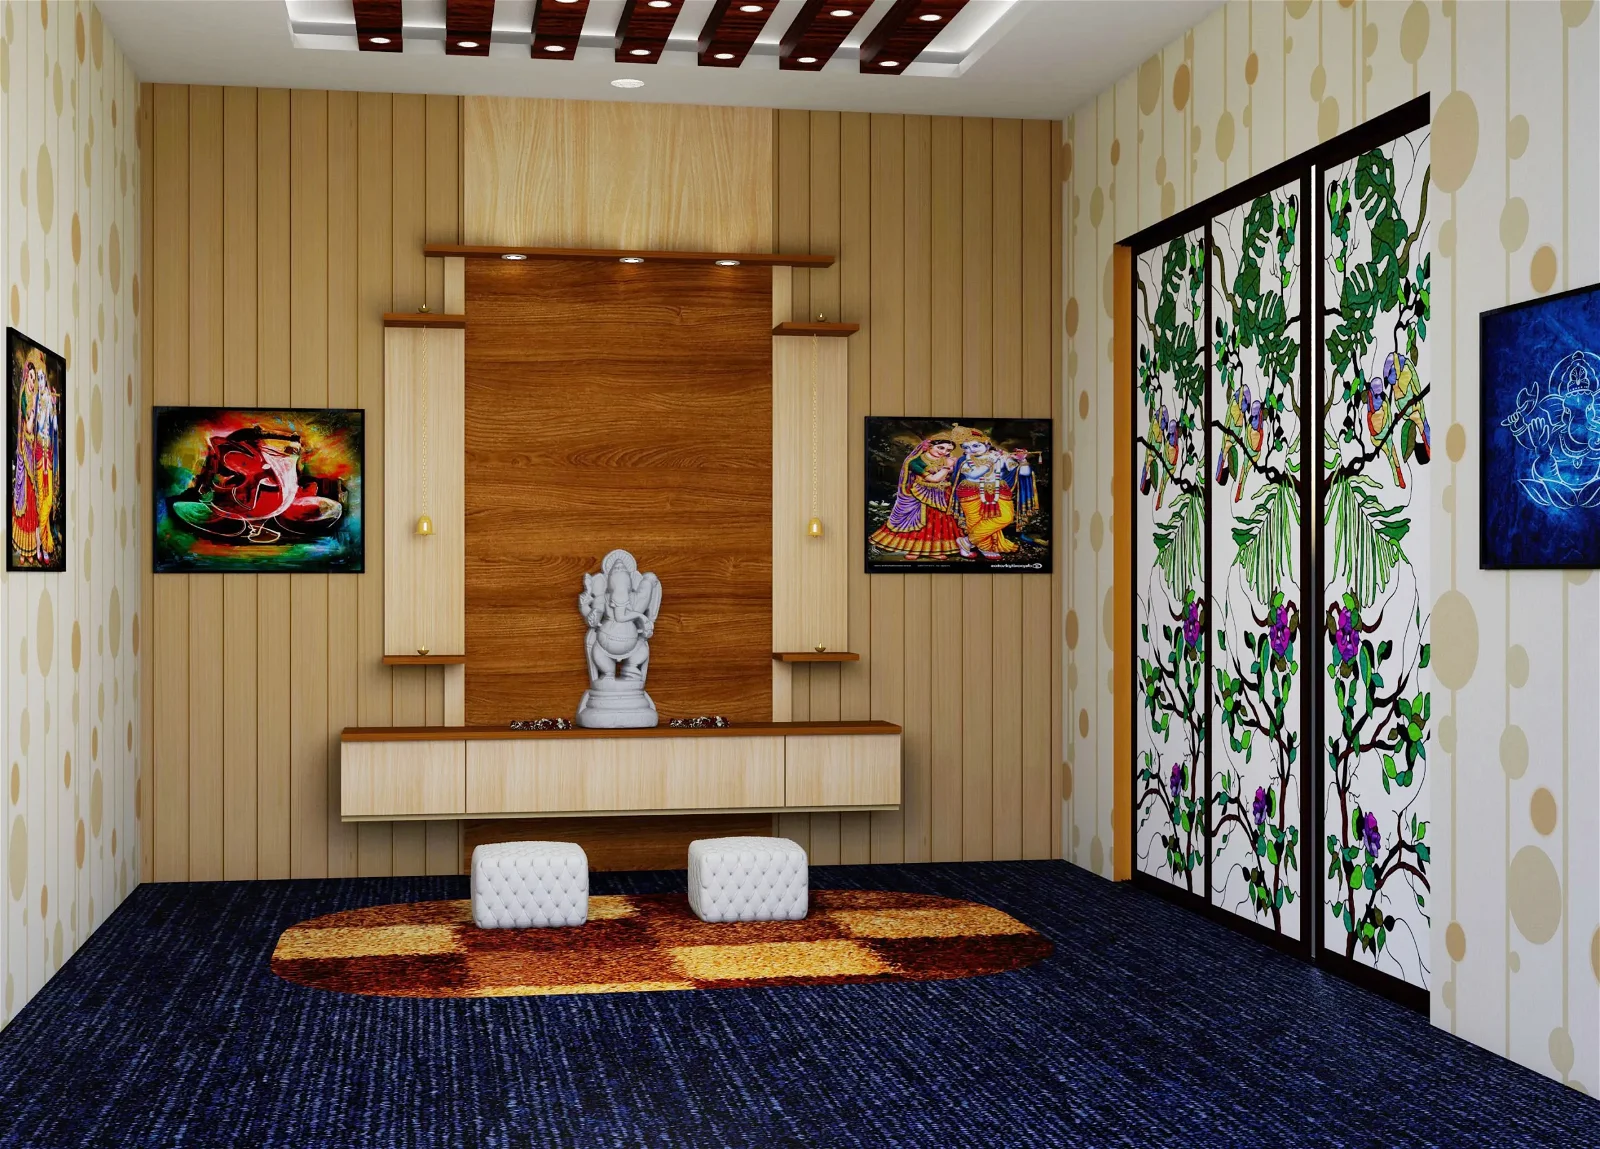 Interior designs for temple with wooden paneling